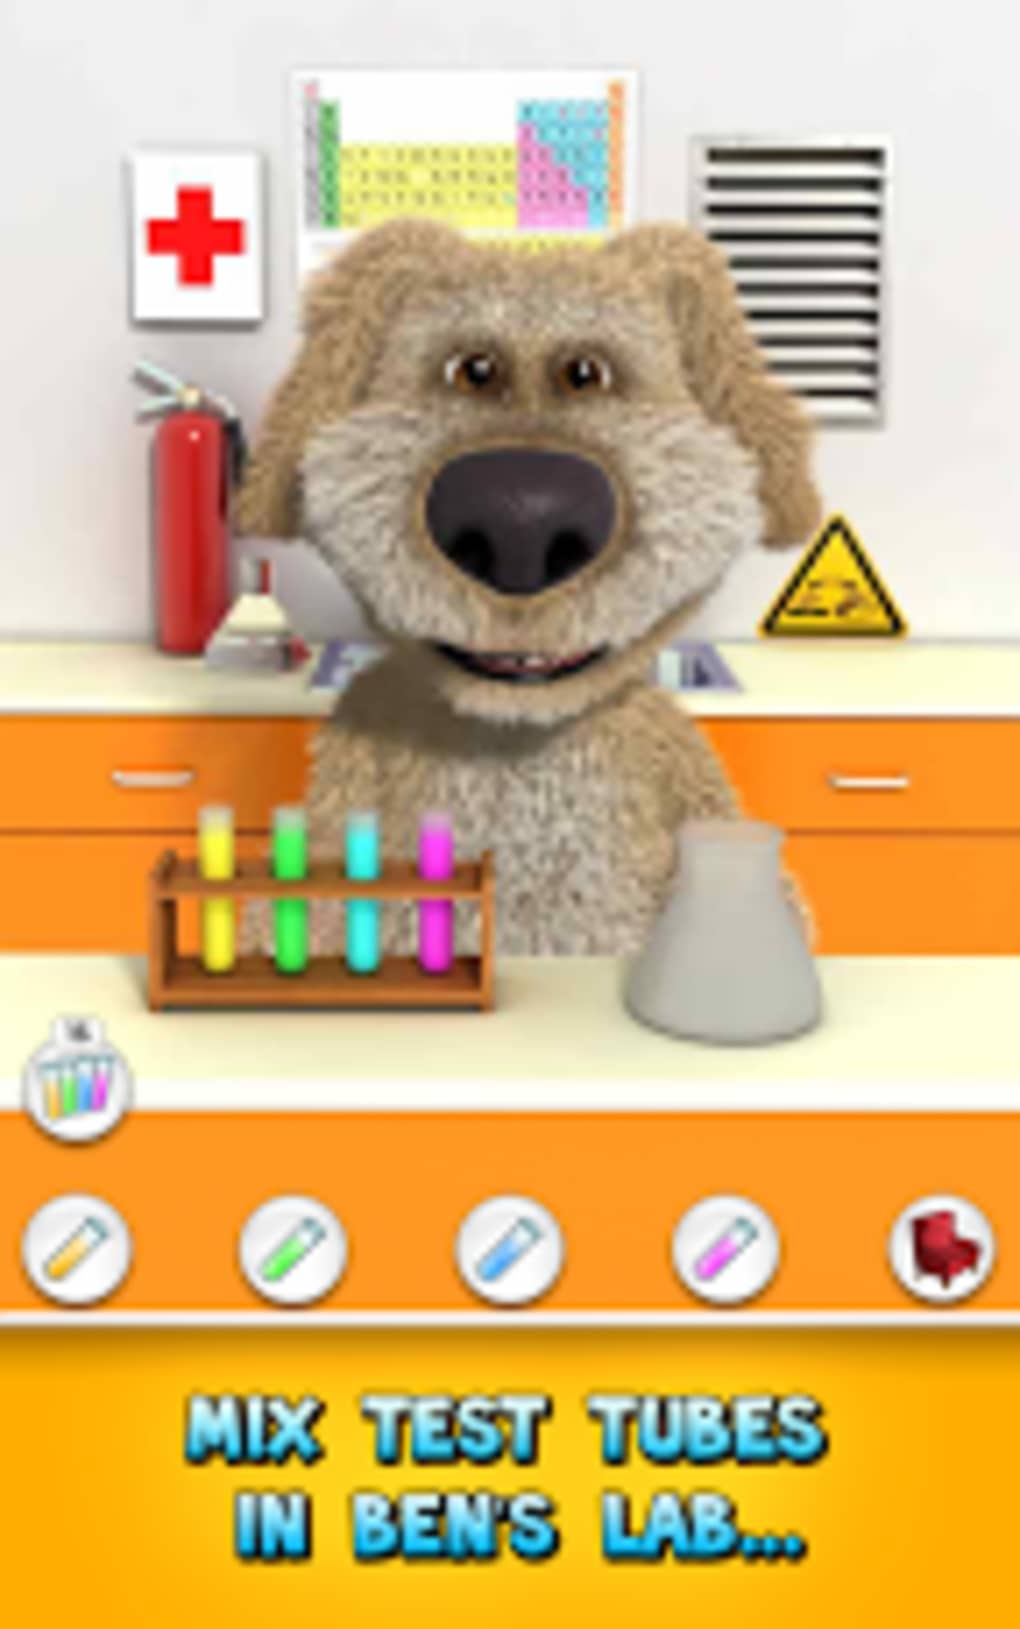 Talking Ben the Dog APK for Android Download